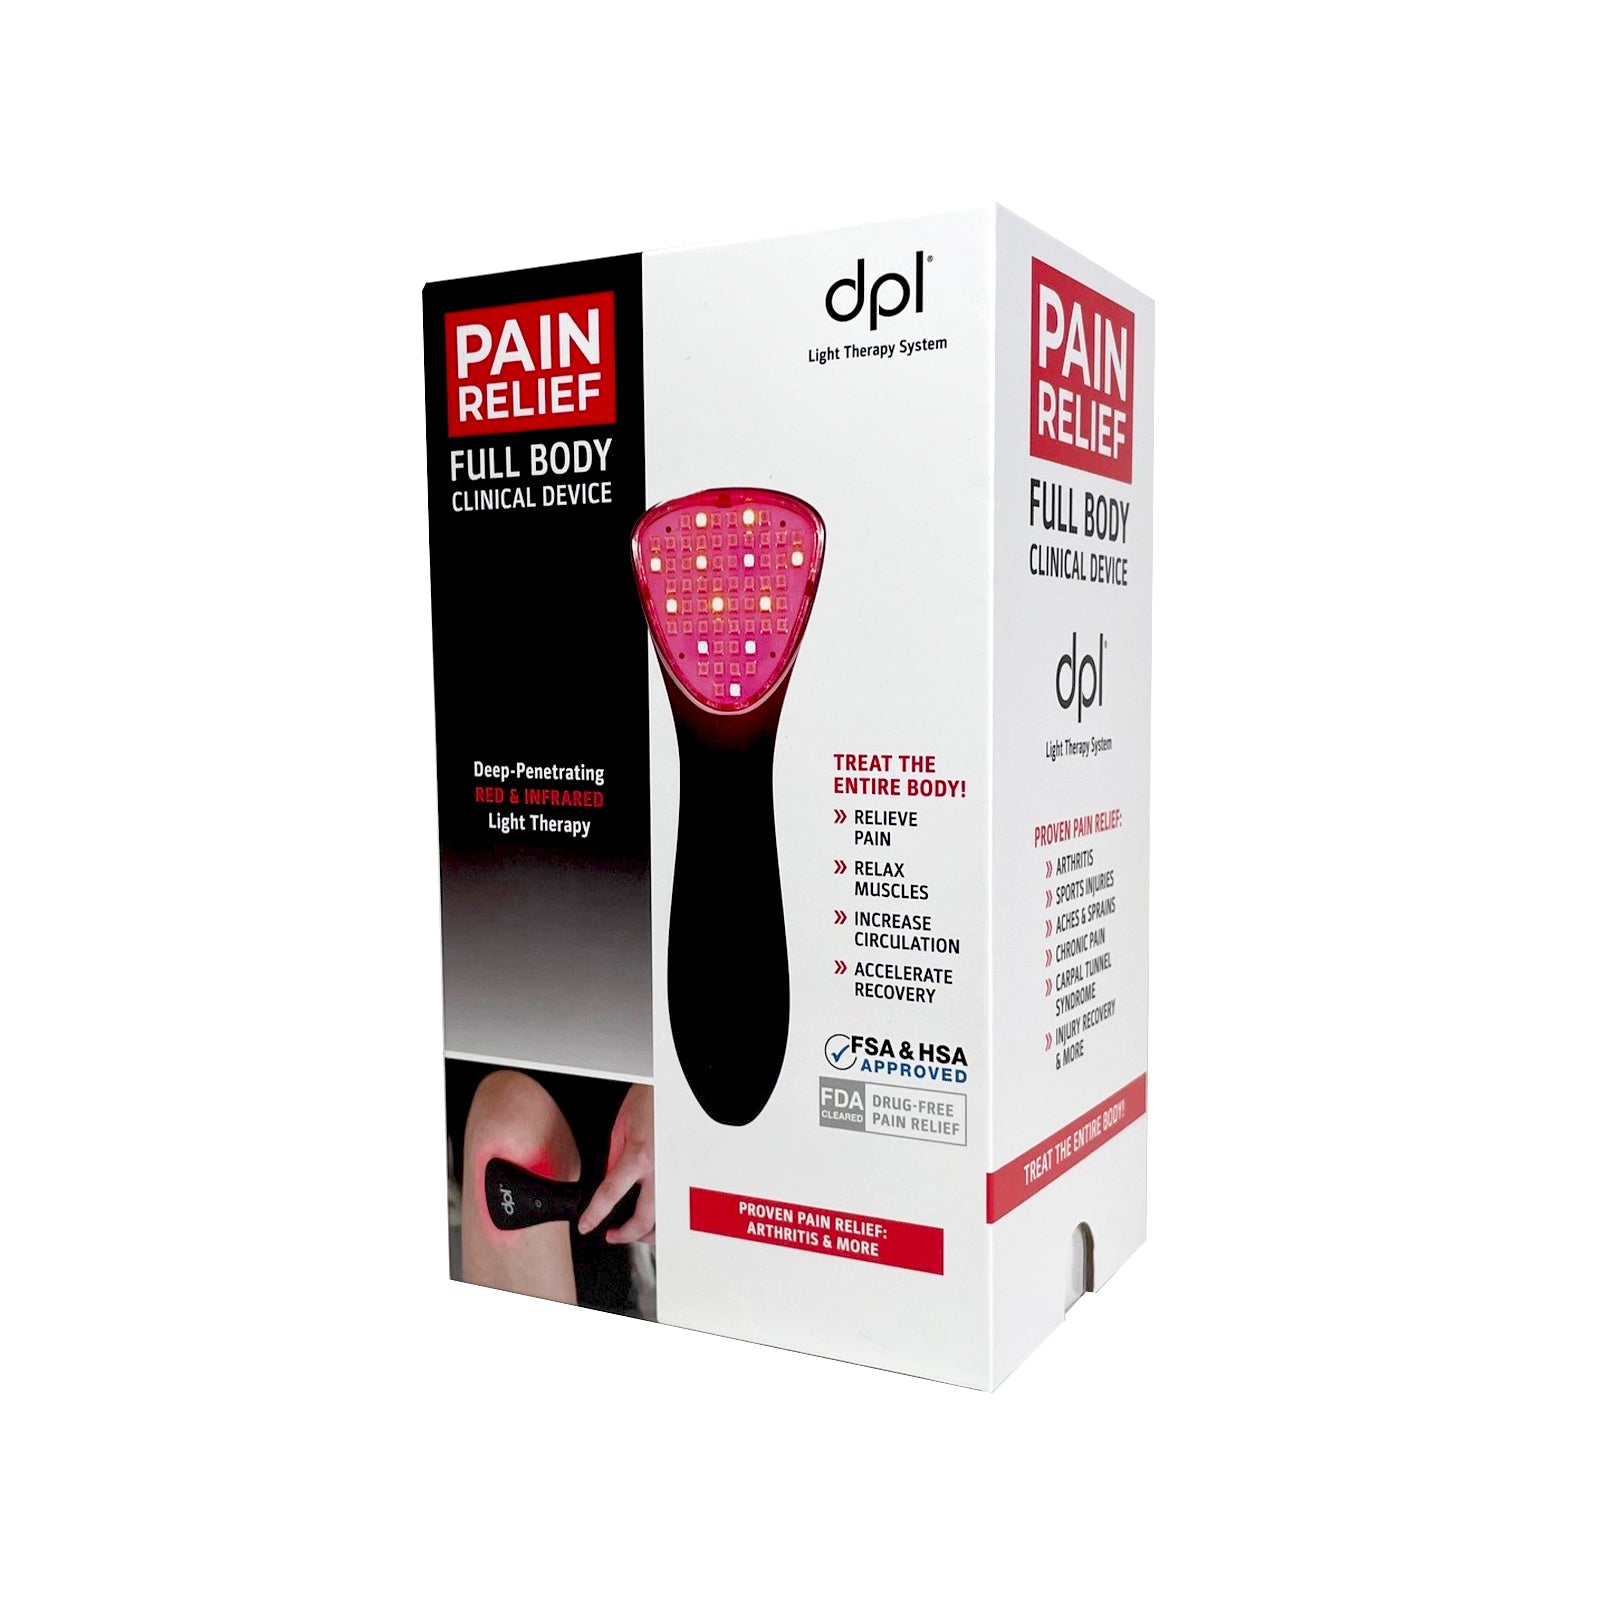 Side view of the packaging for the DPL Clinical Handheld Light Therapy for Pain Relief